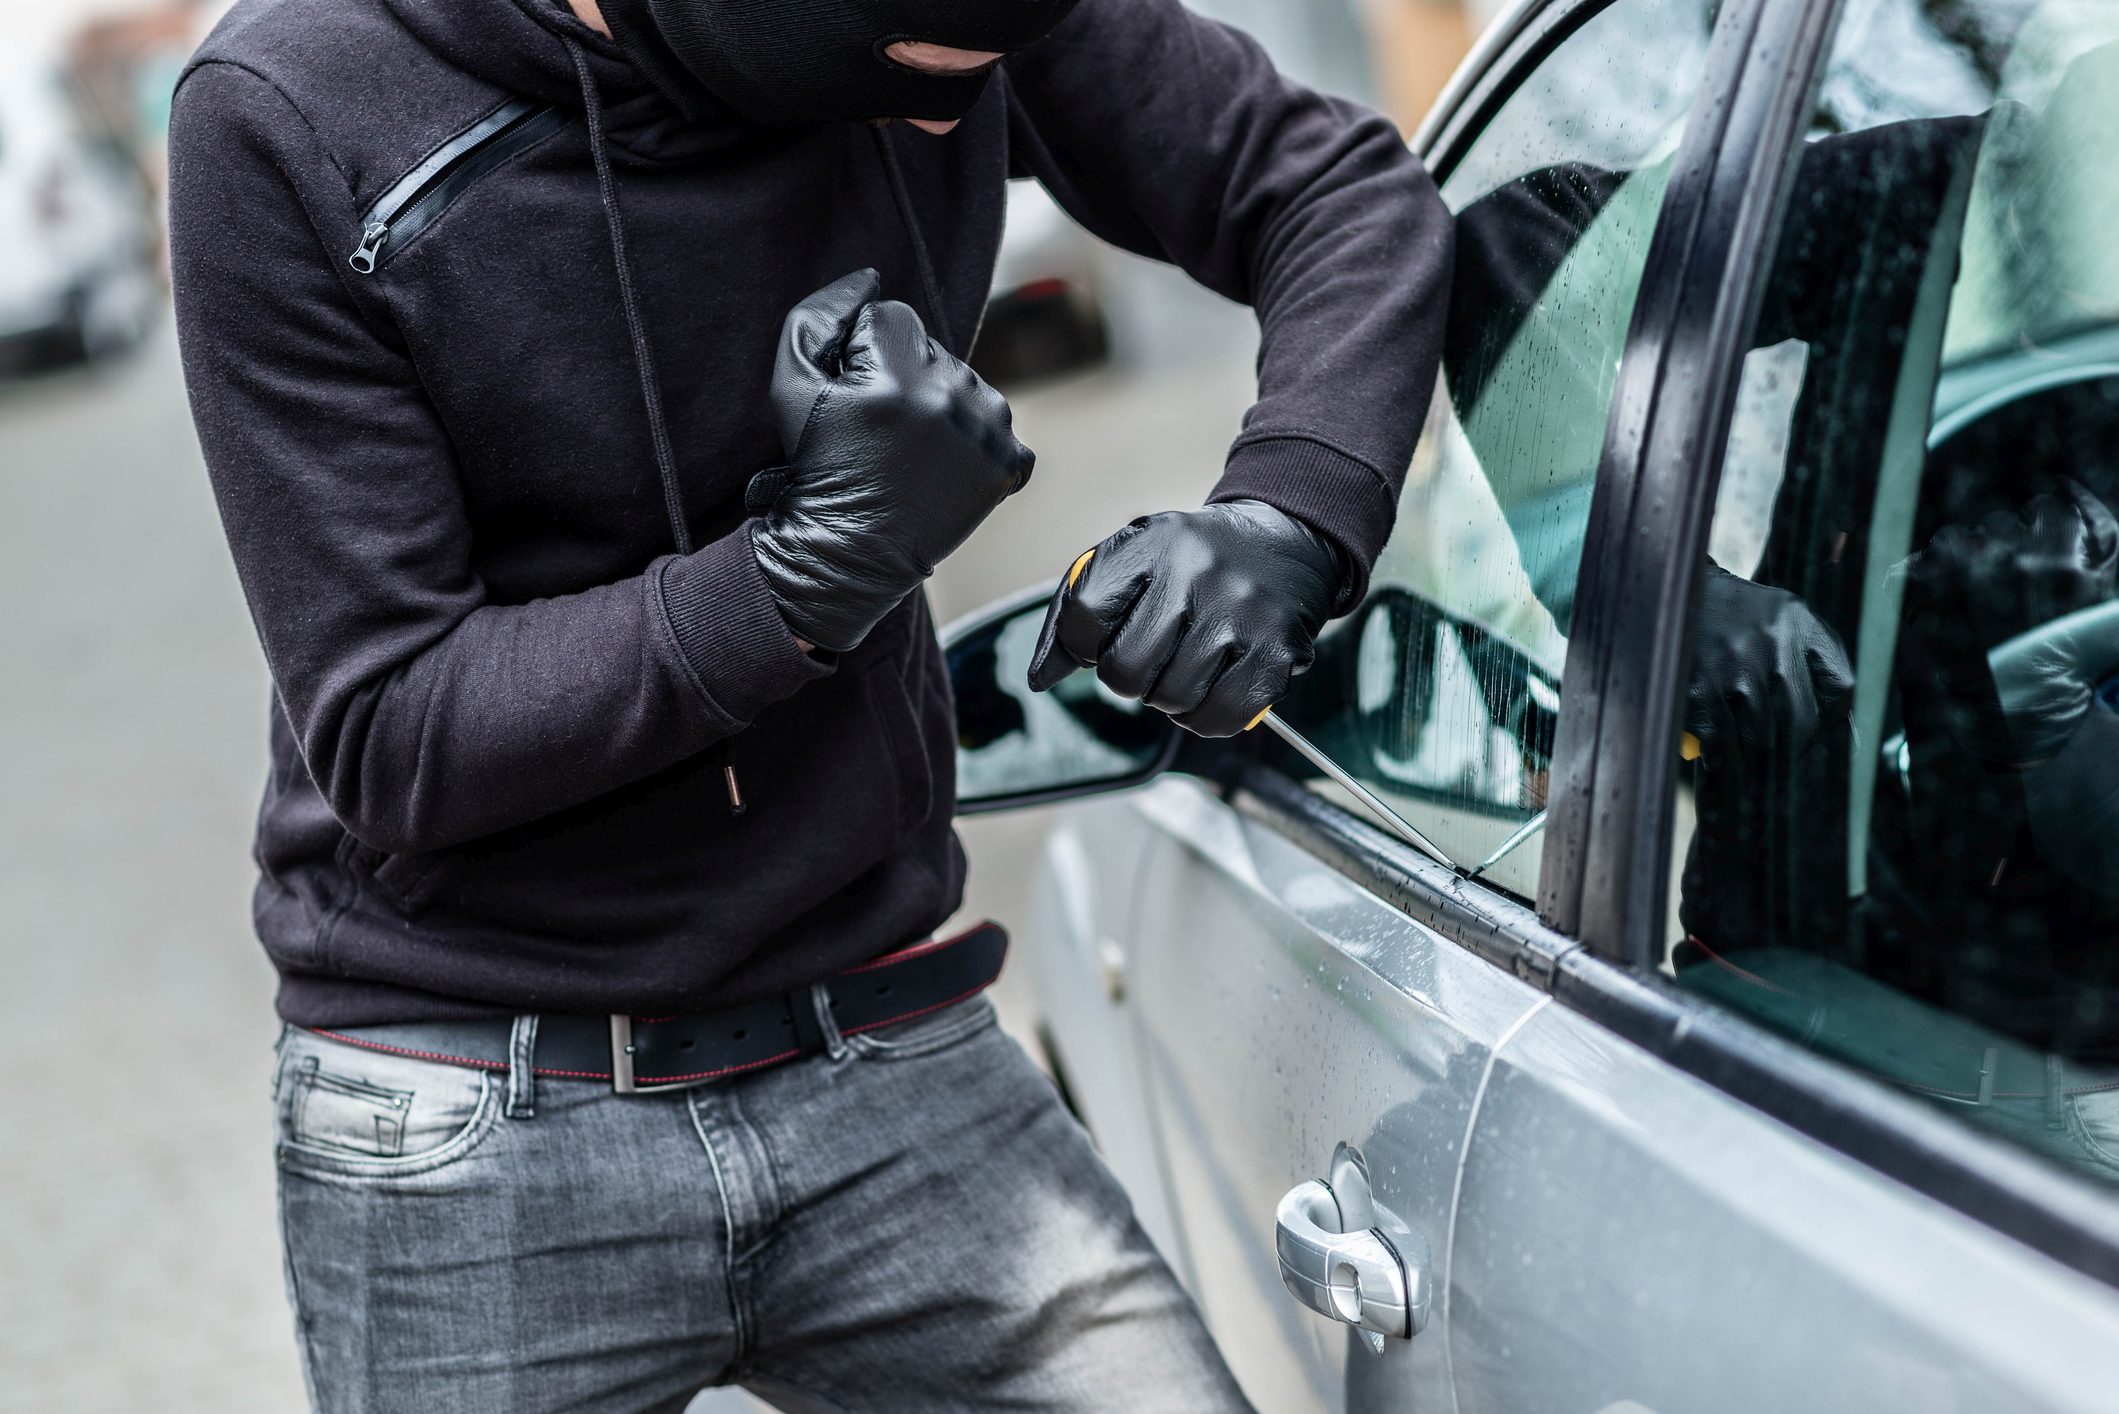 Hyundai and Kia Are Giving Away Free Locks After Targeting By Car Thieves